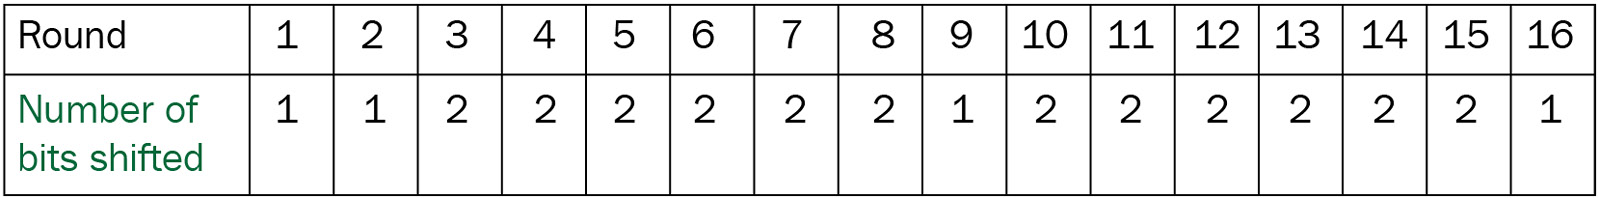 Figure 2.17 – Showing the number of key bits shifted in each round in DES